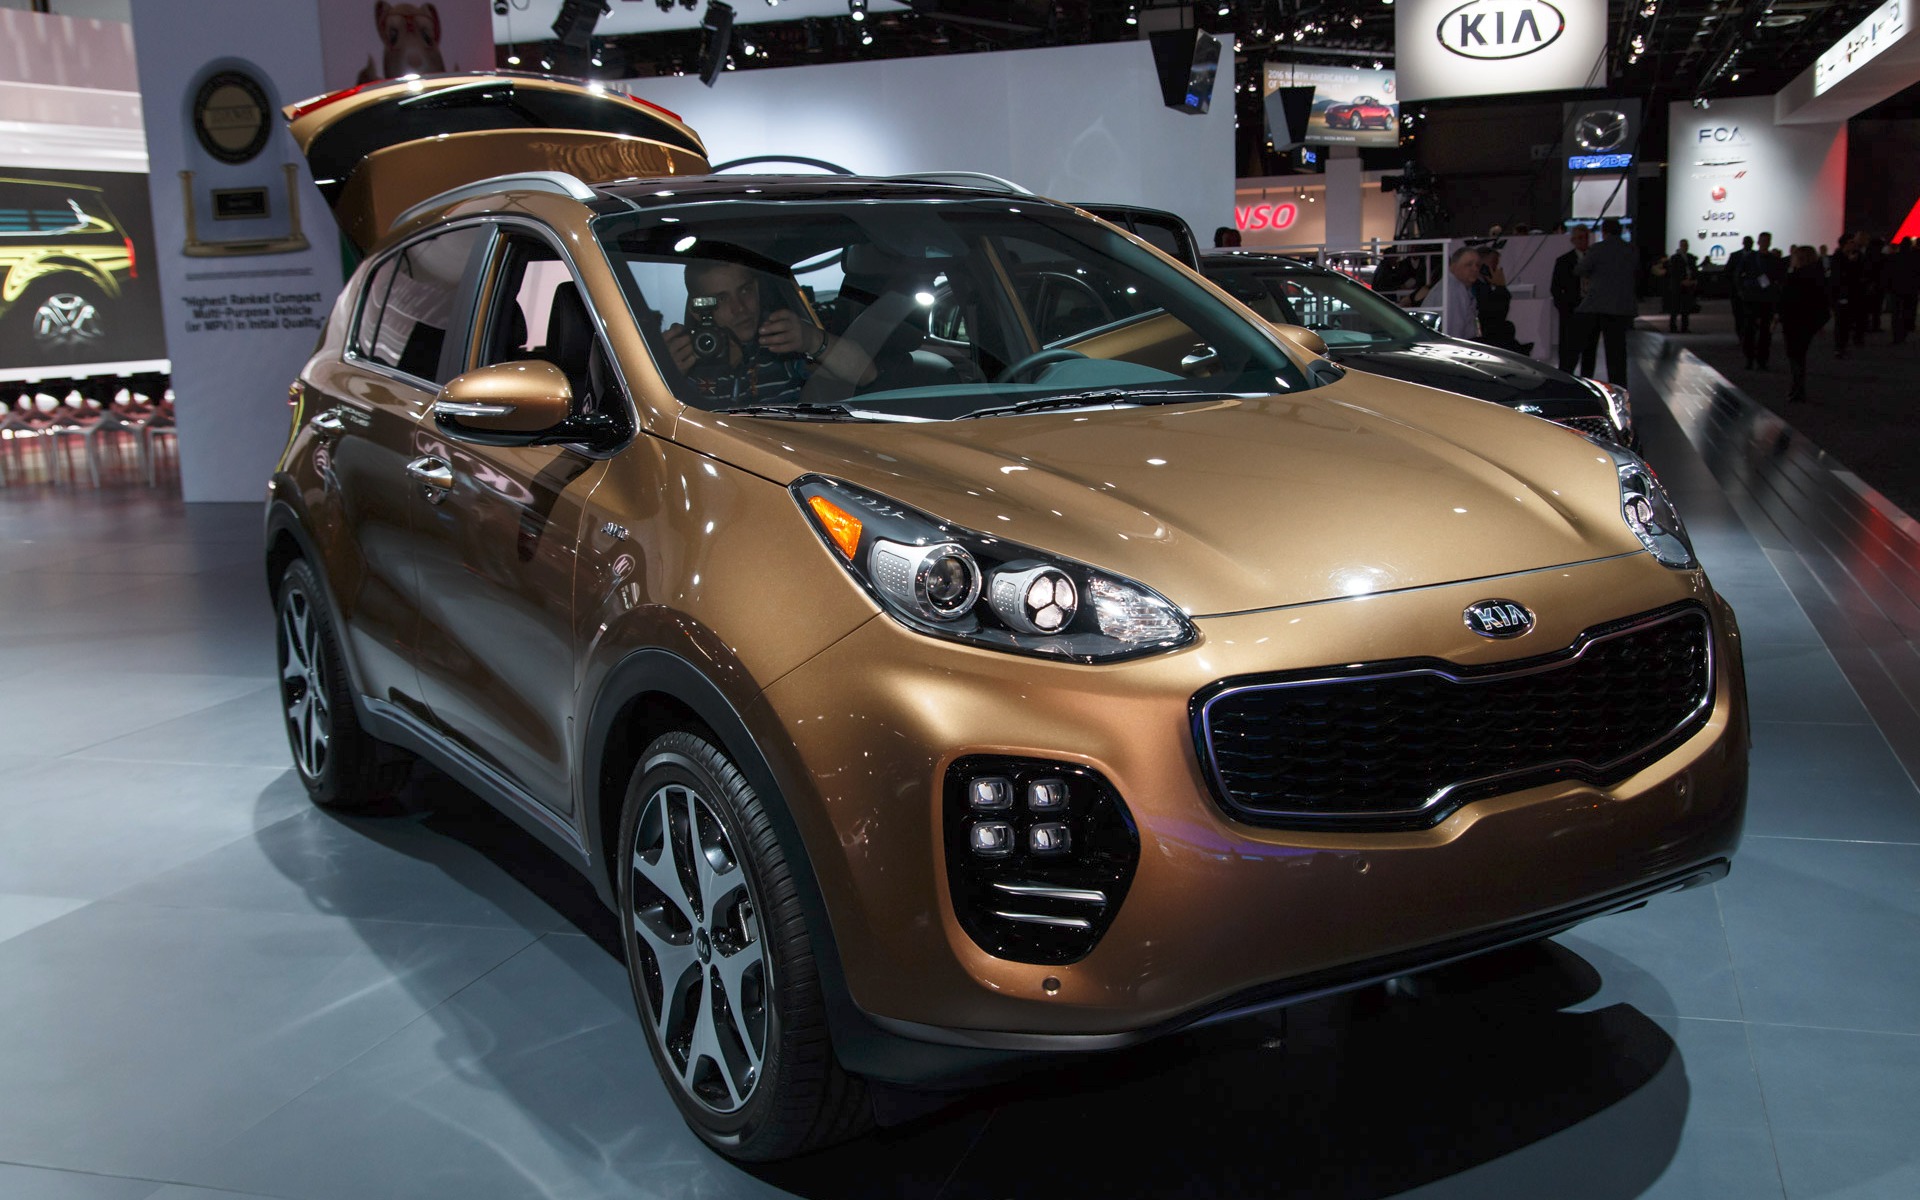 We’re about to get our hands on the 2017 Kia Sportage